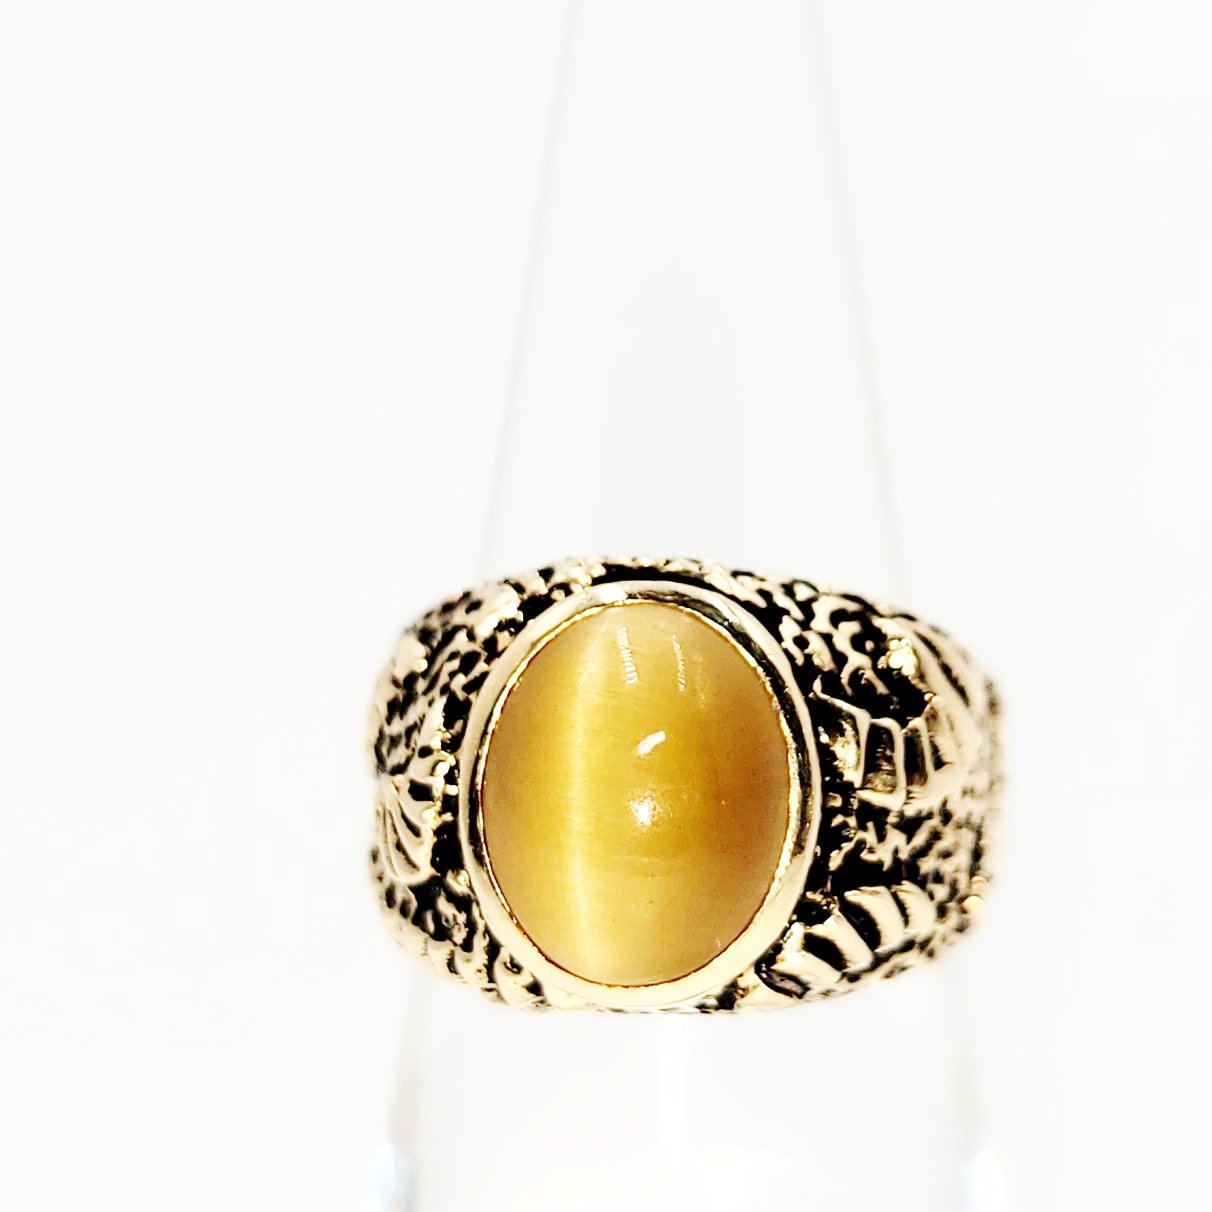 Chrysoberyl Cats Eye Ring 14kt Gold Leaf Nugget Ring - Elevated Metaphysical